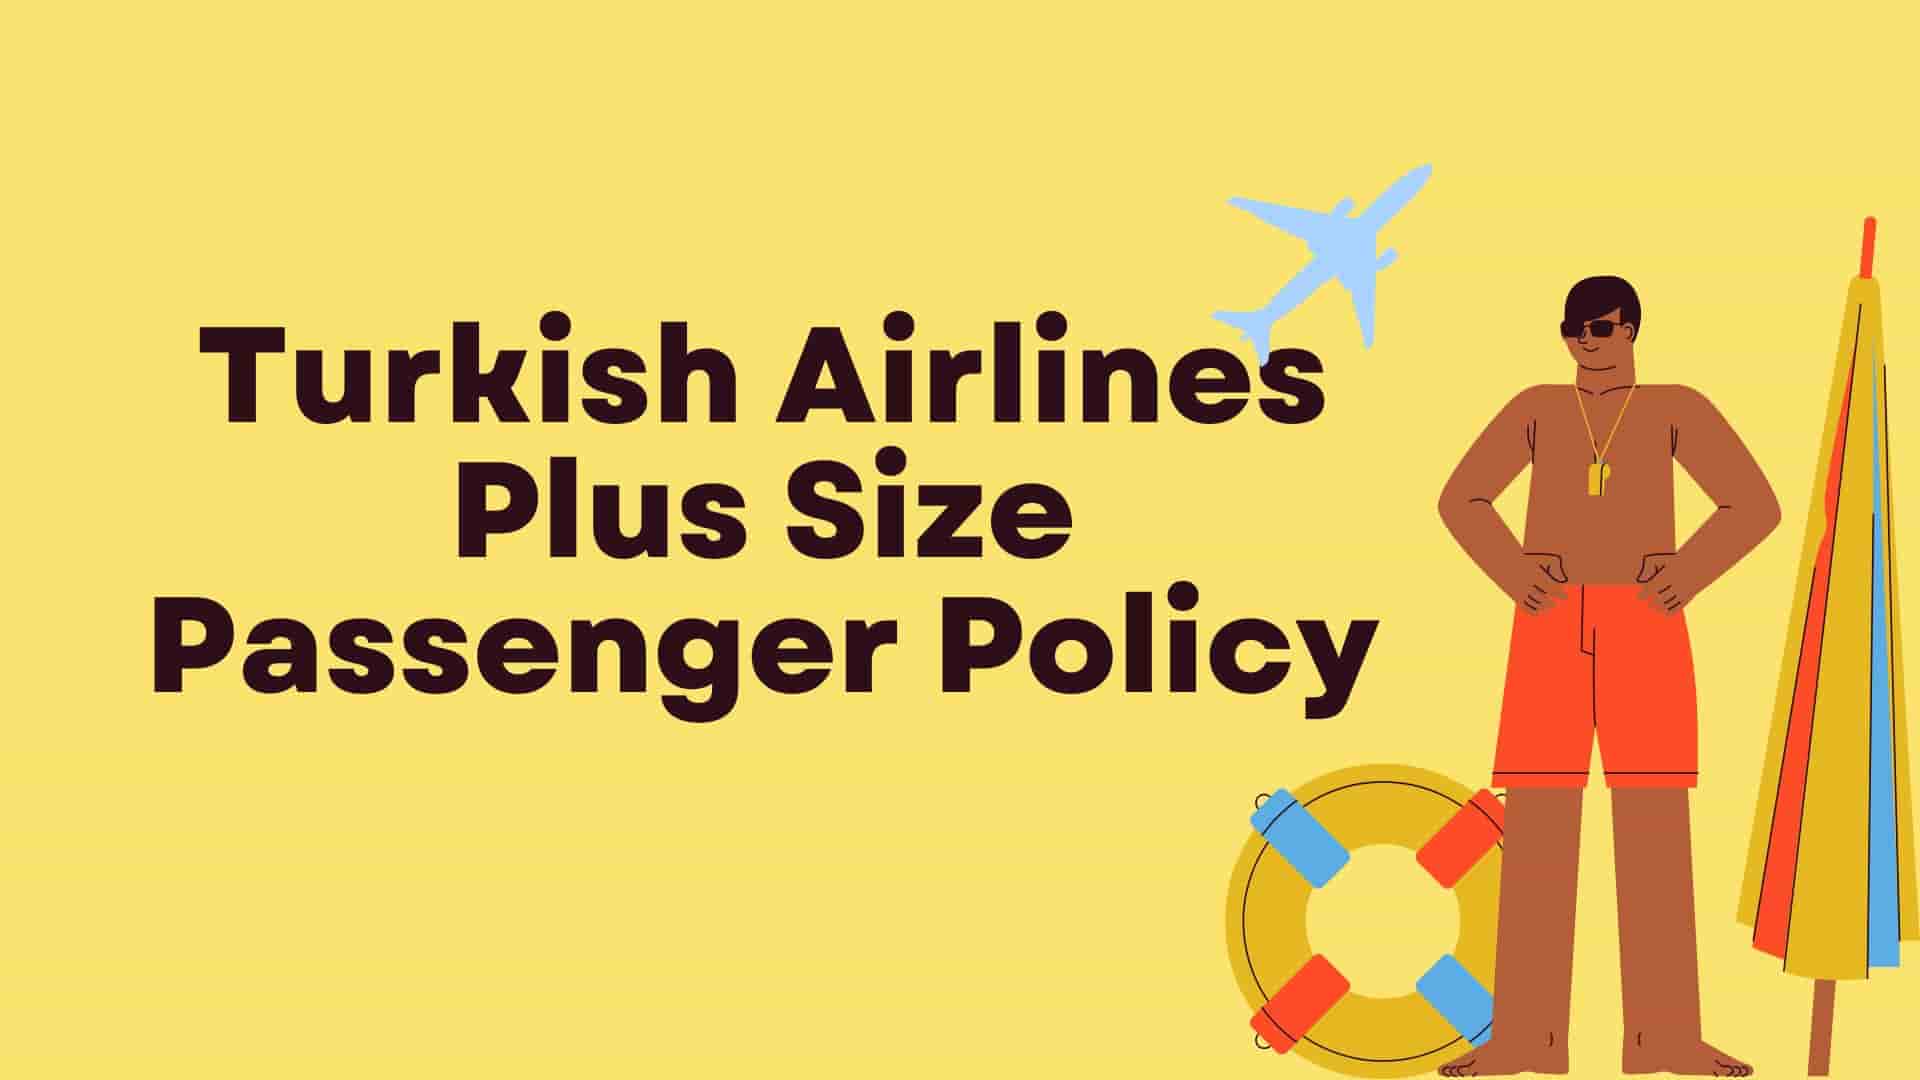 Turkish Airlines Plus Size Passenger Policy63f7062f8421f.jpg